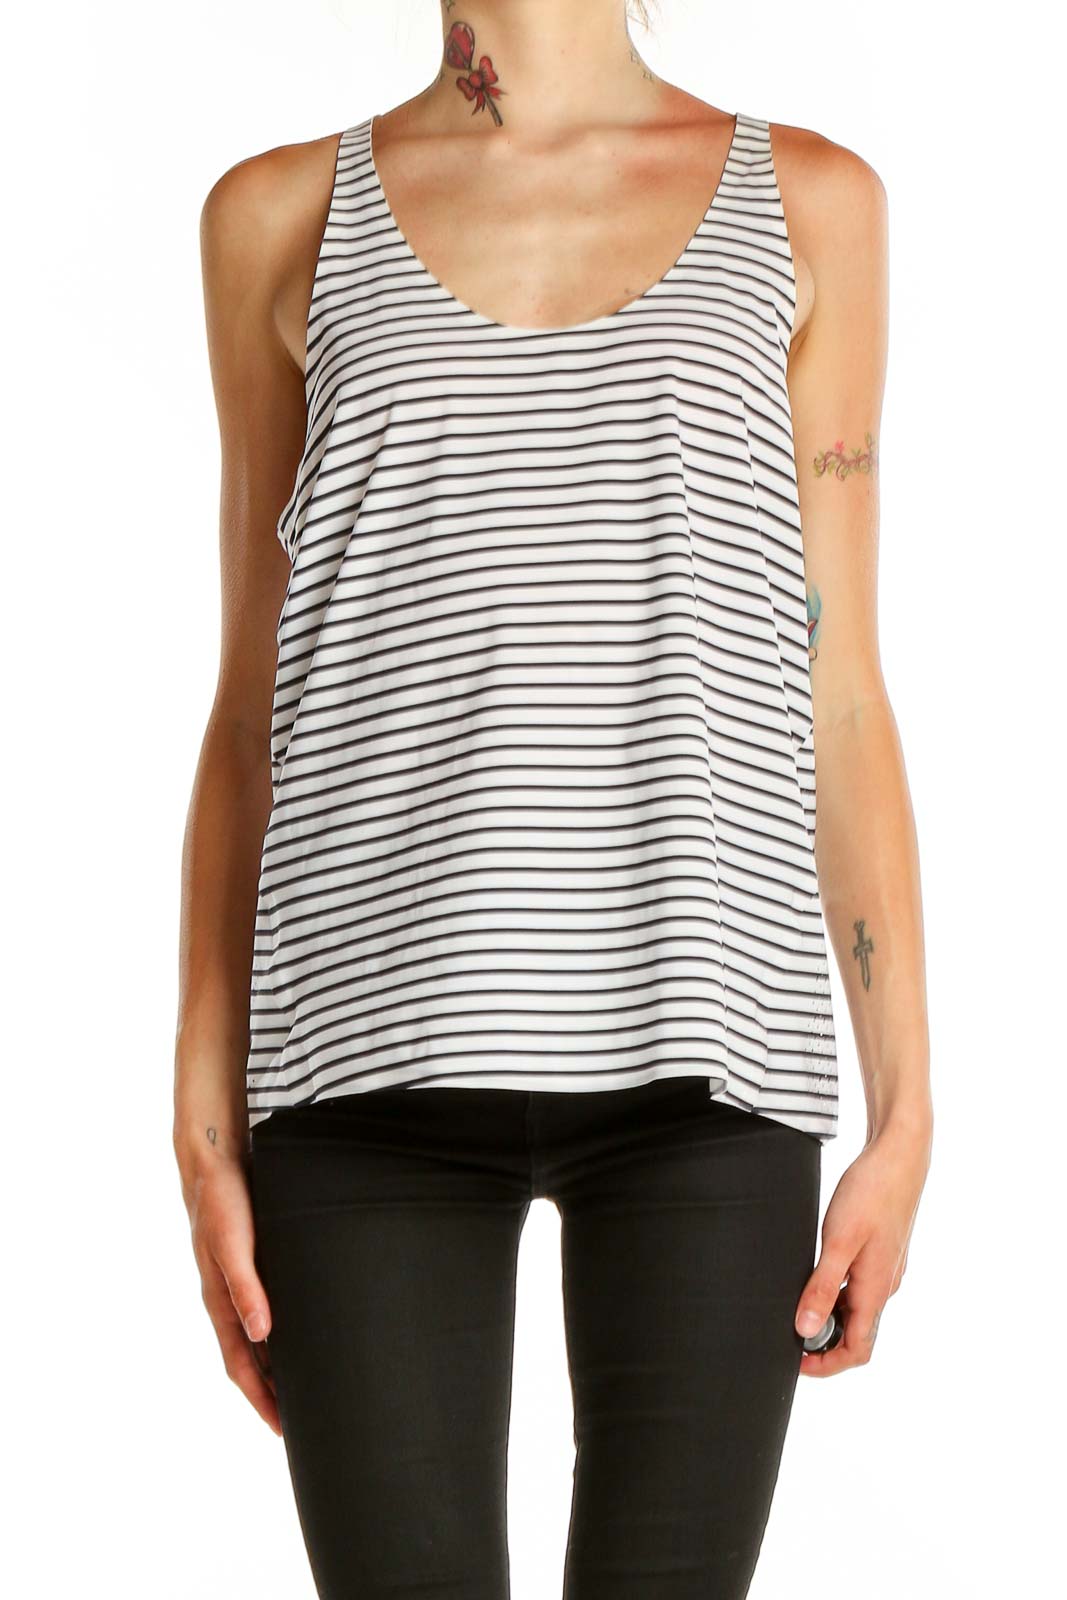 White Striped Activewear Tank Top Front